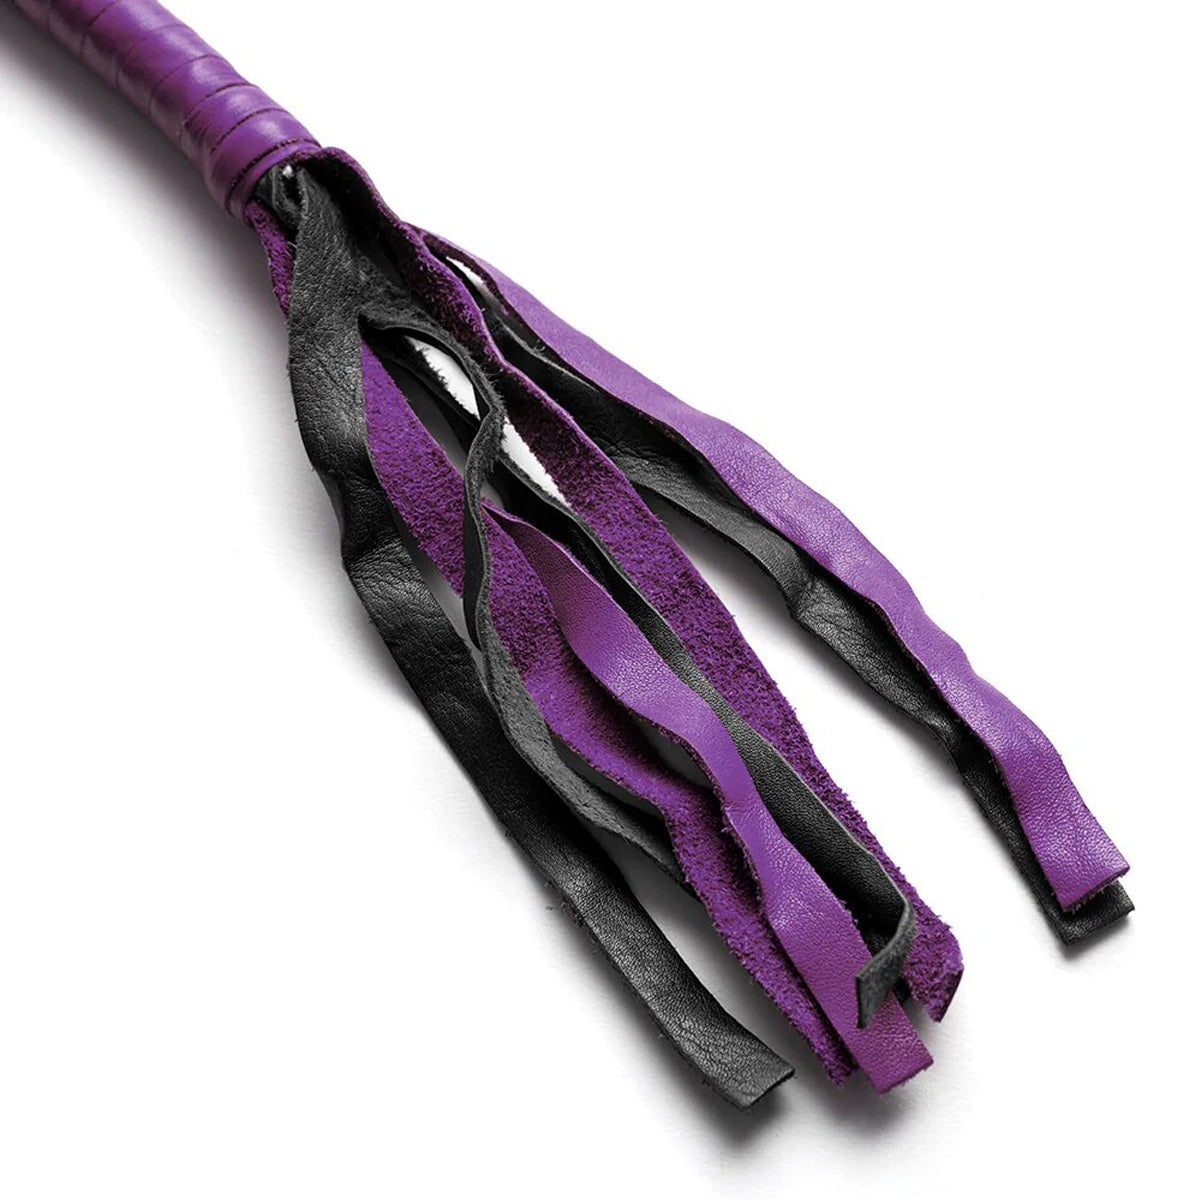 40 INCHES GET BACK WHIP IN PURPLE & BLACK